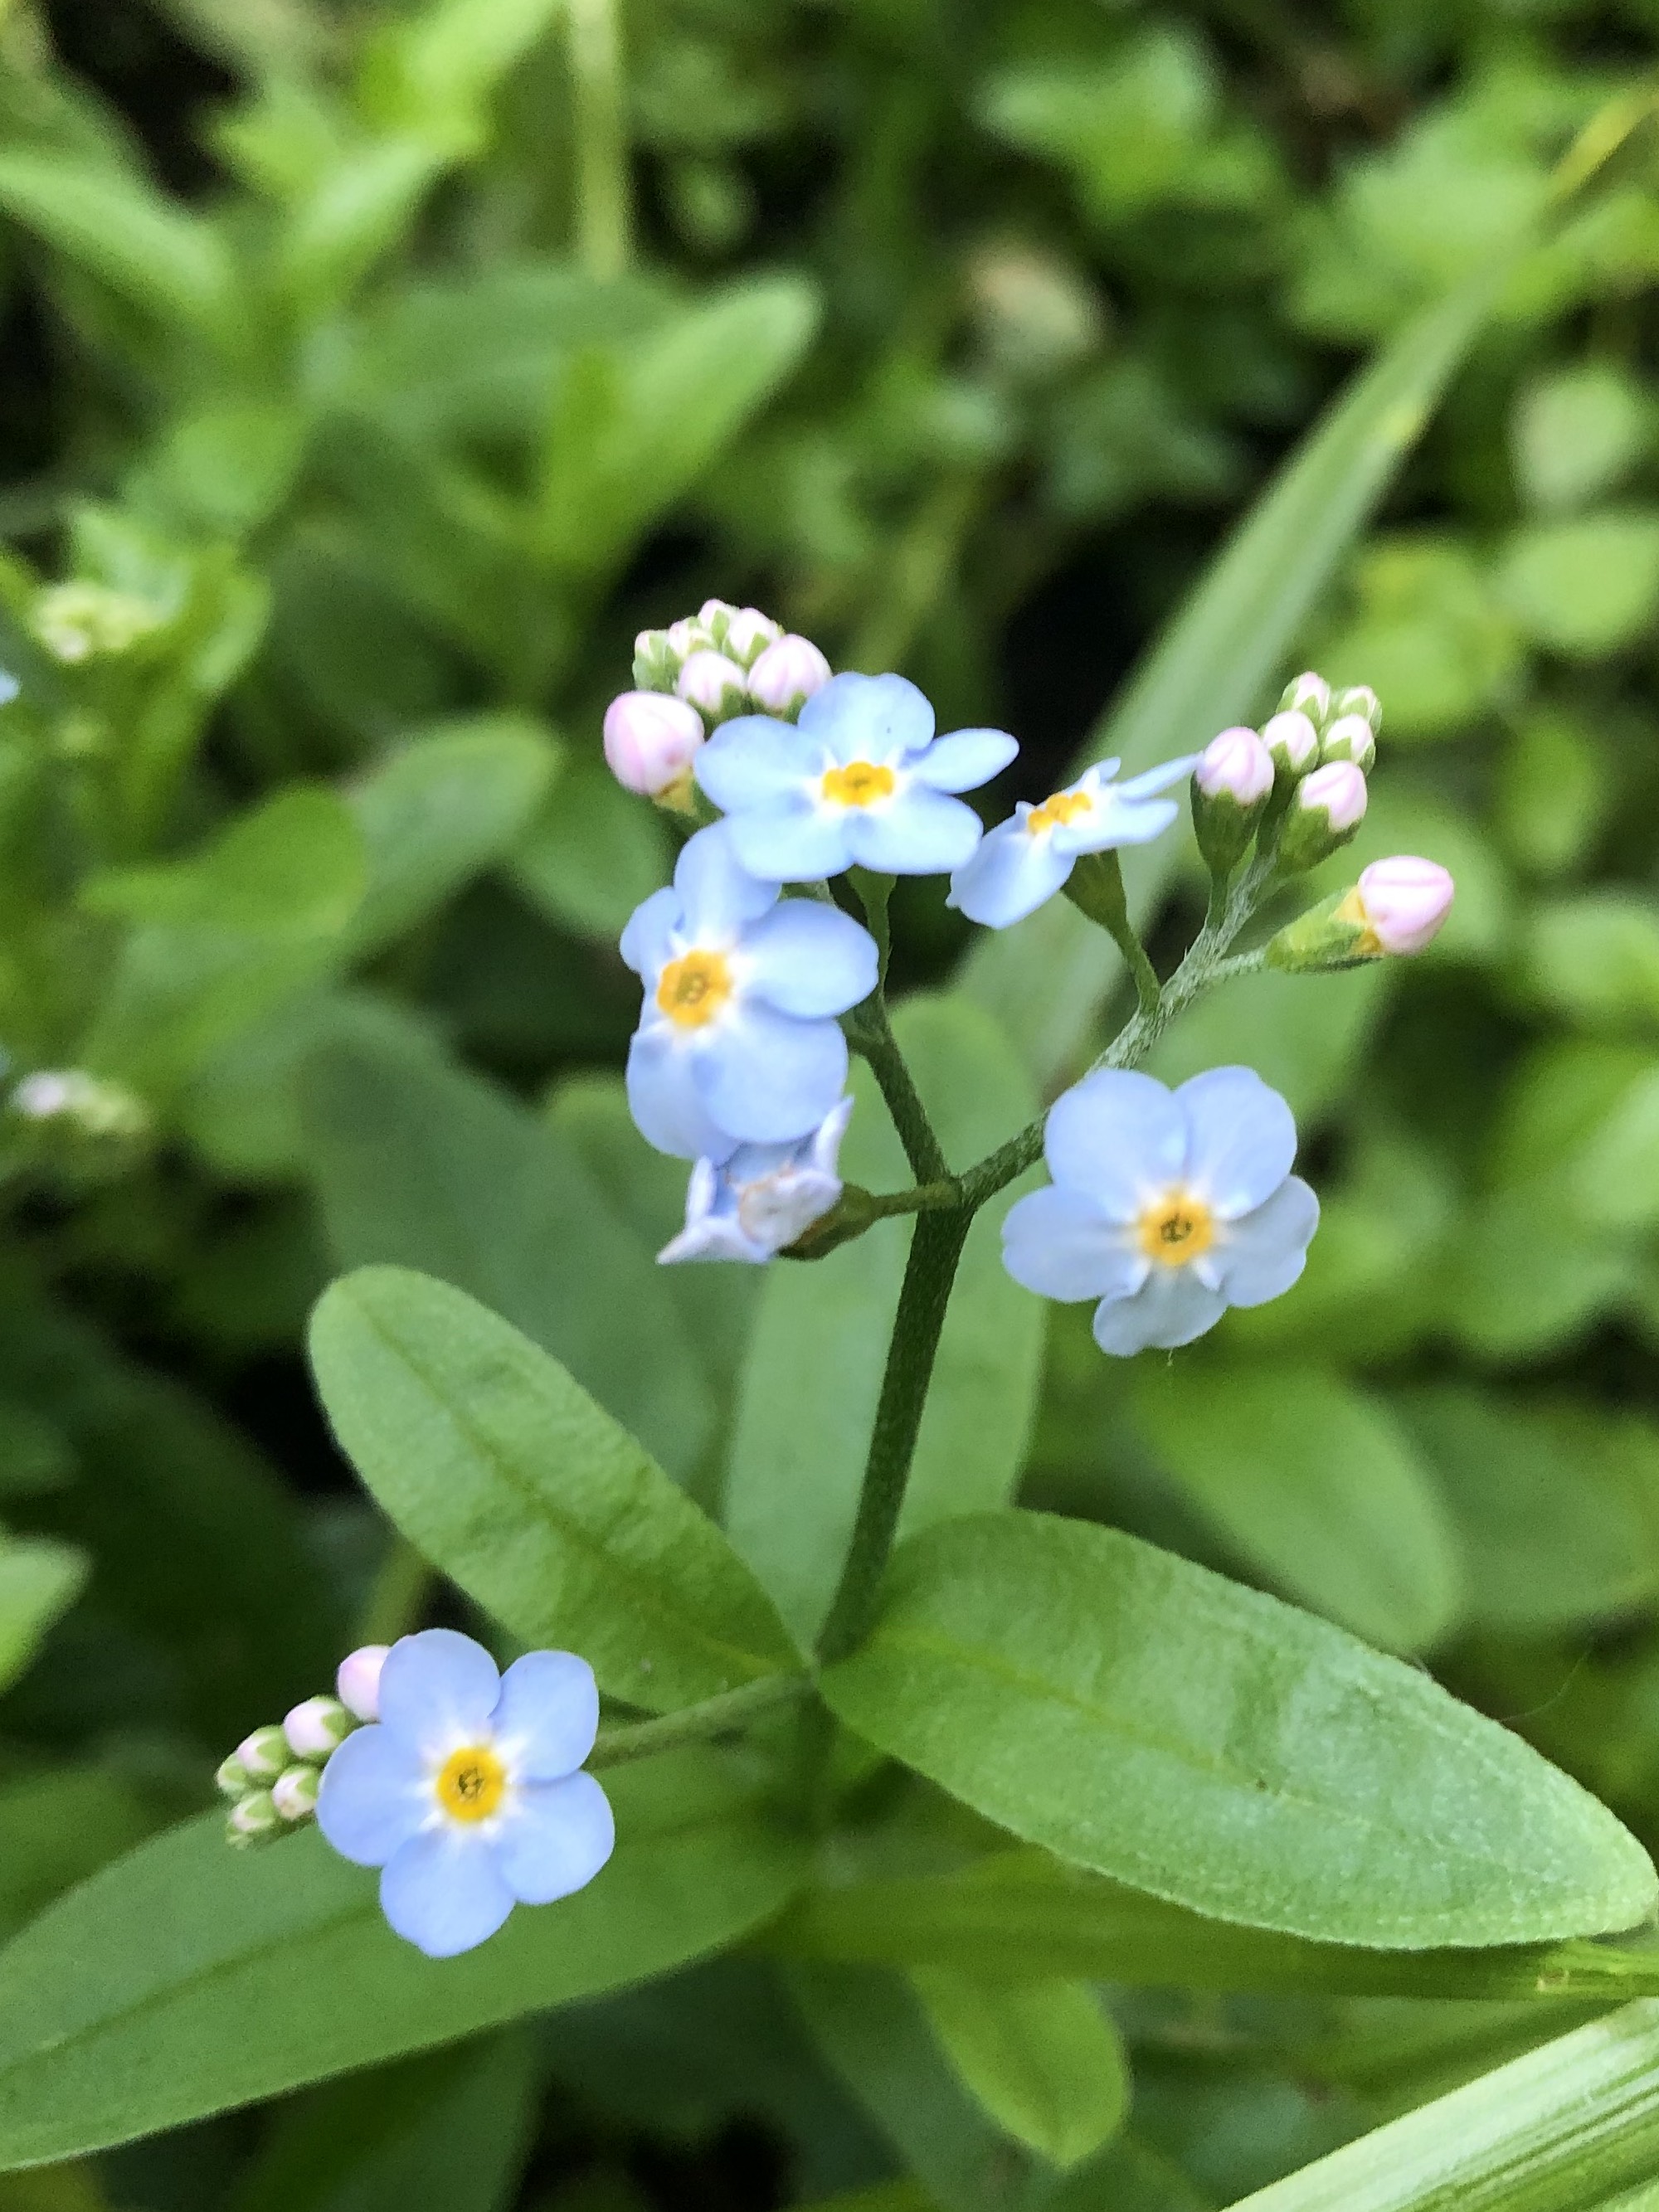 True Forget-me-not near cattails at Pickford Street stormwater outflow into Lake Wingra in Madison, Wisconsin on June 14, 2020.